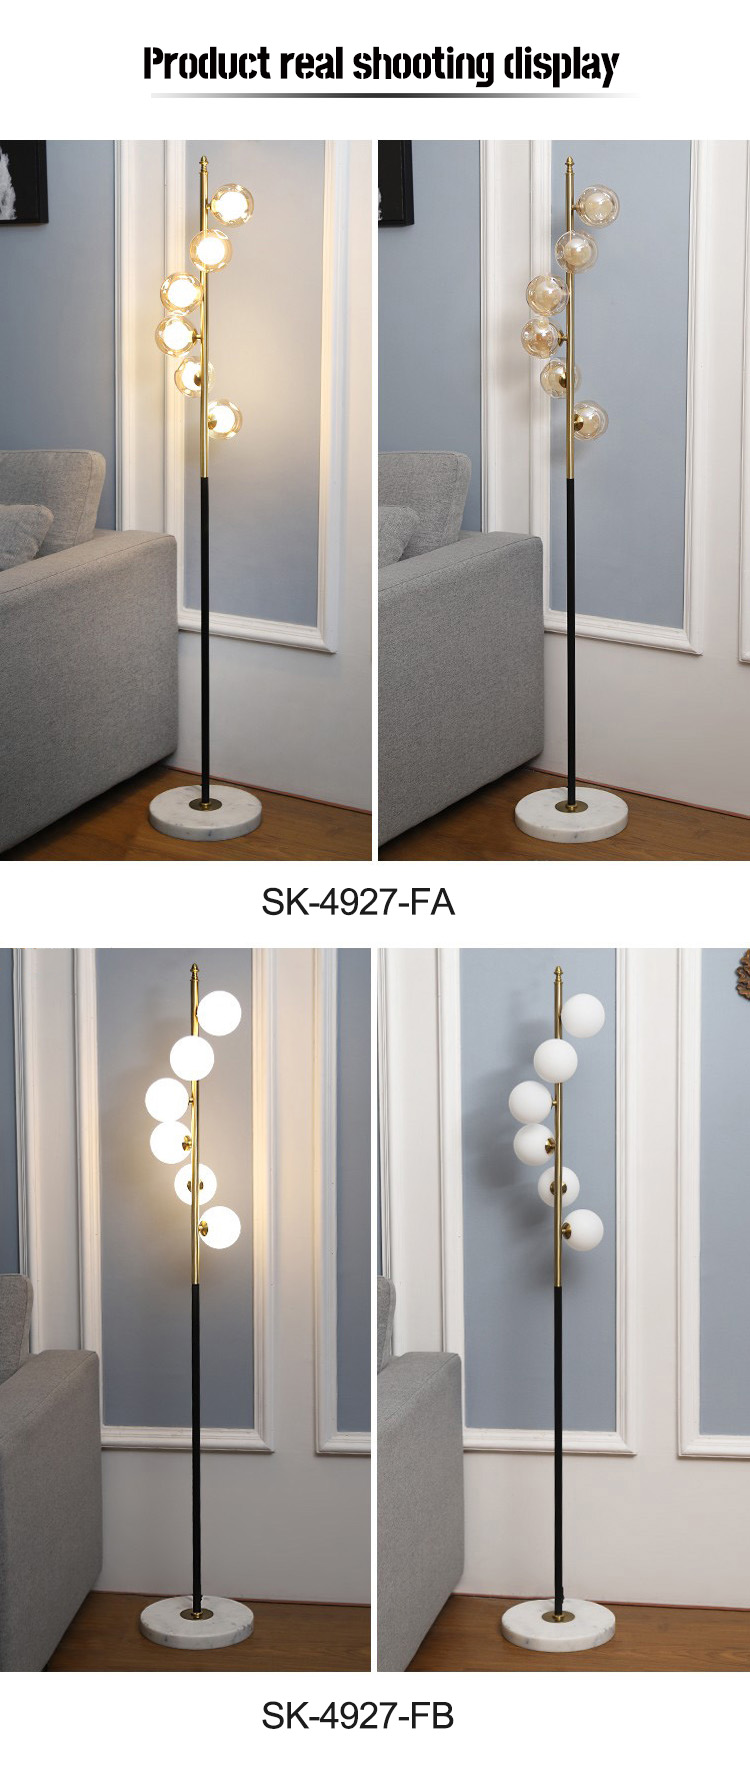 The floor lamp with its white marble base, black gold pillar, and opal glass spheres is a perfect blend of modern and classic design elements.